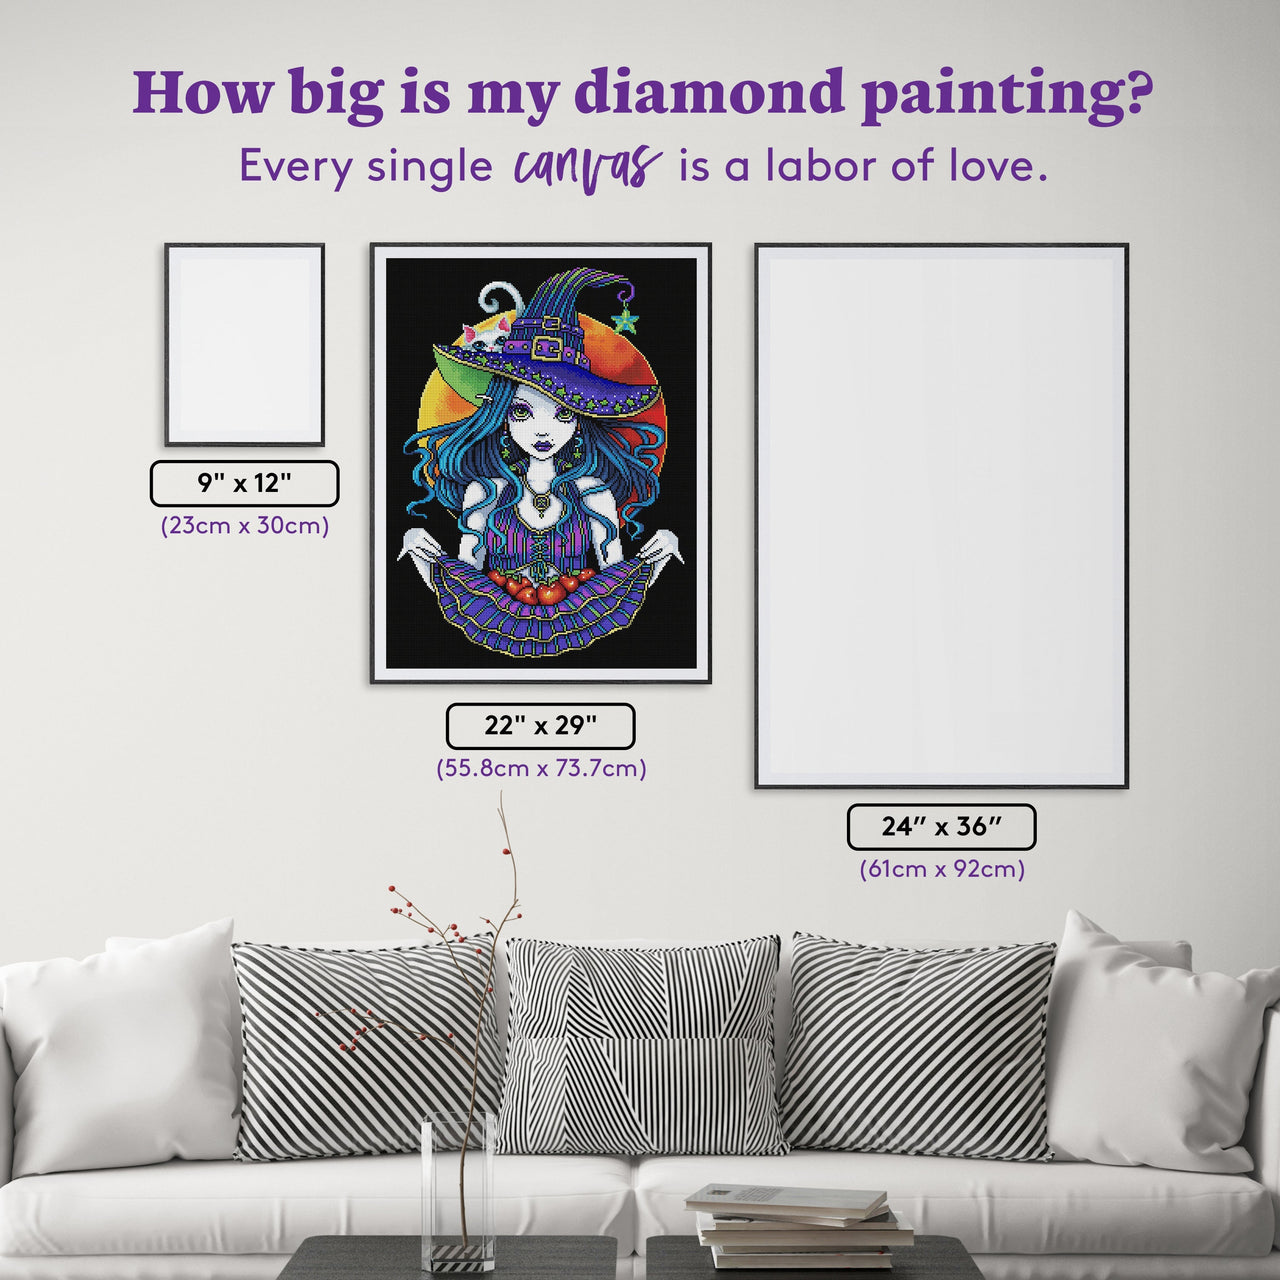 Diamond Painting Pomona 22" x 29" (55.8cm x 73.7cm) / Round with 37 Colors including 2 ABs and 1 Iridescent Diamonds and 2 Fairy Dust Diamonds / 52,337